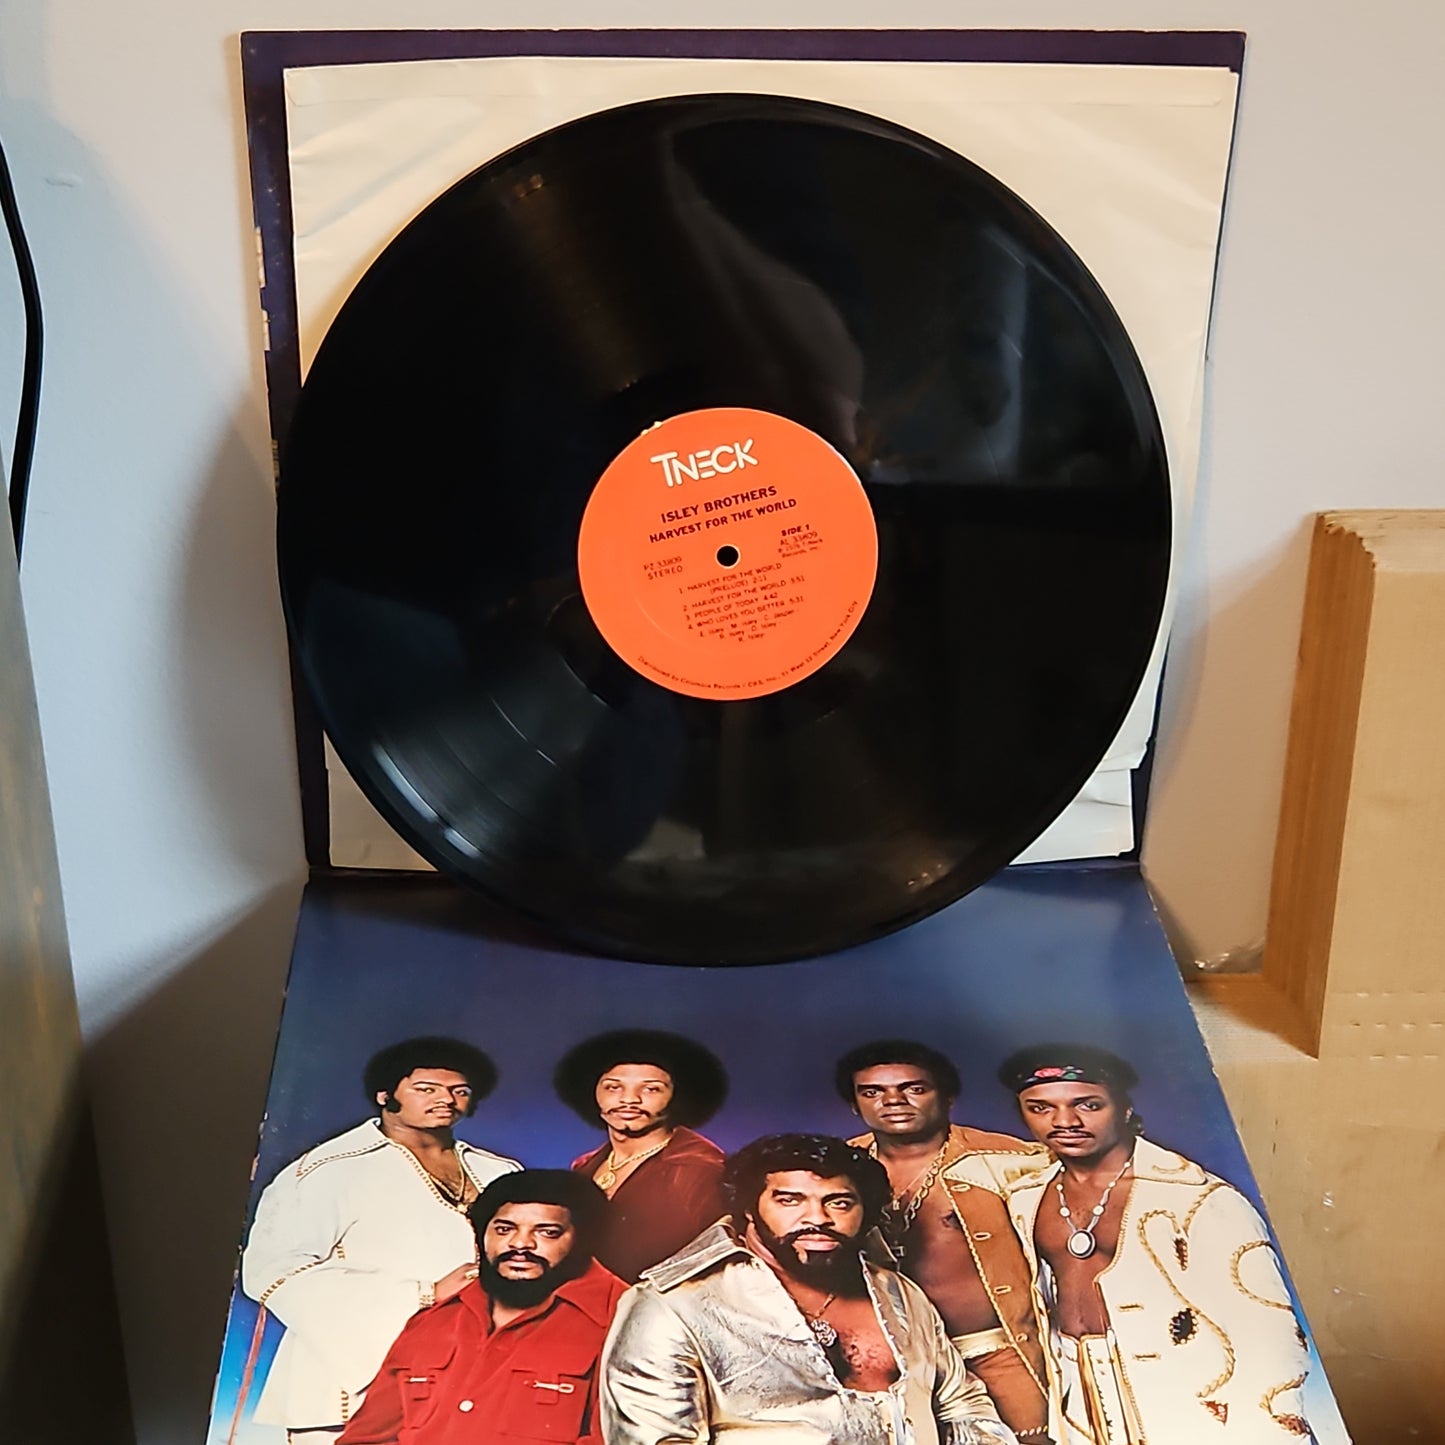 The Isley Brothers Harvest for the World By CBS Records